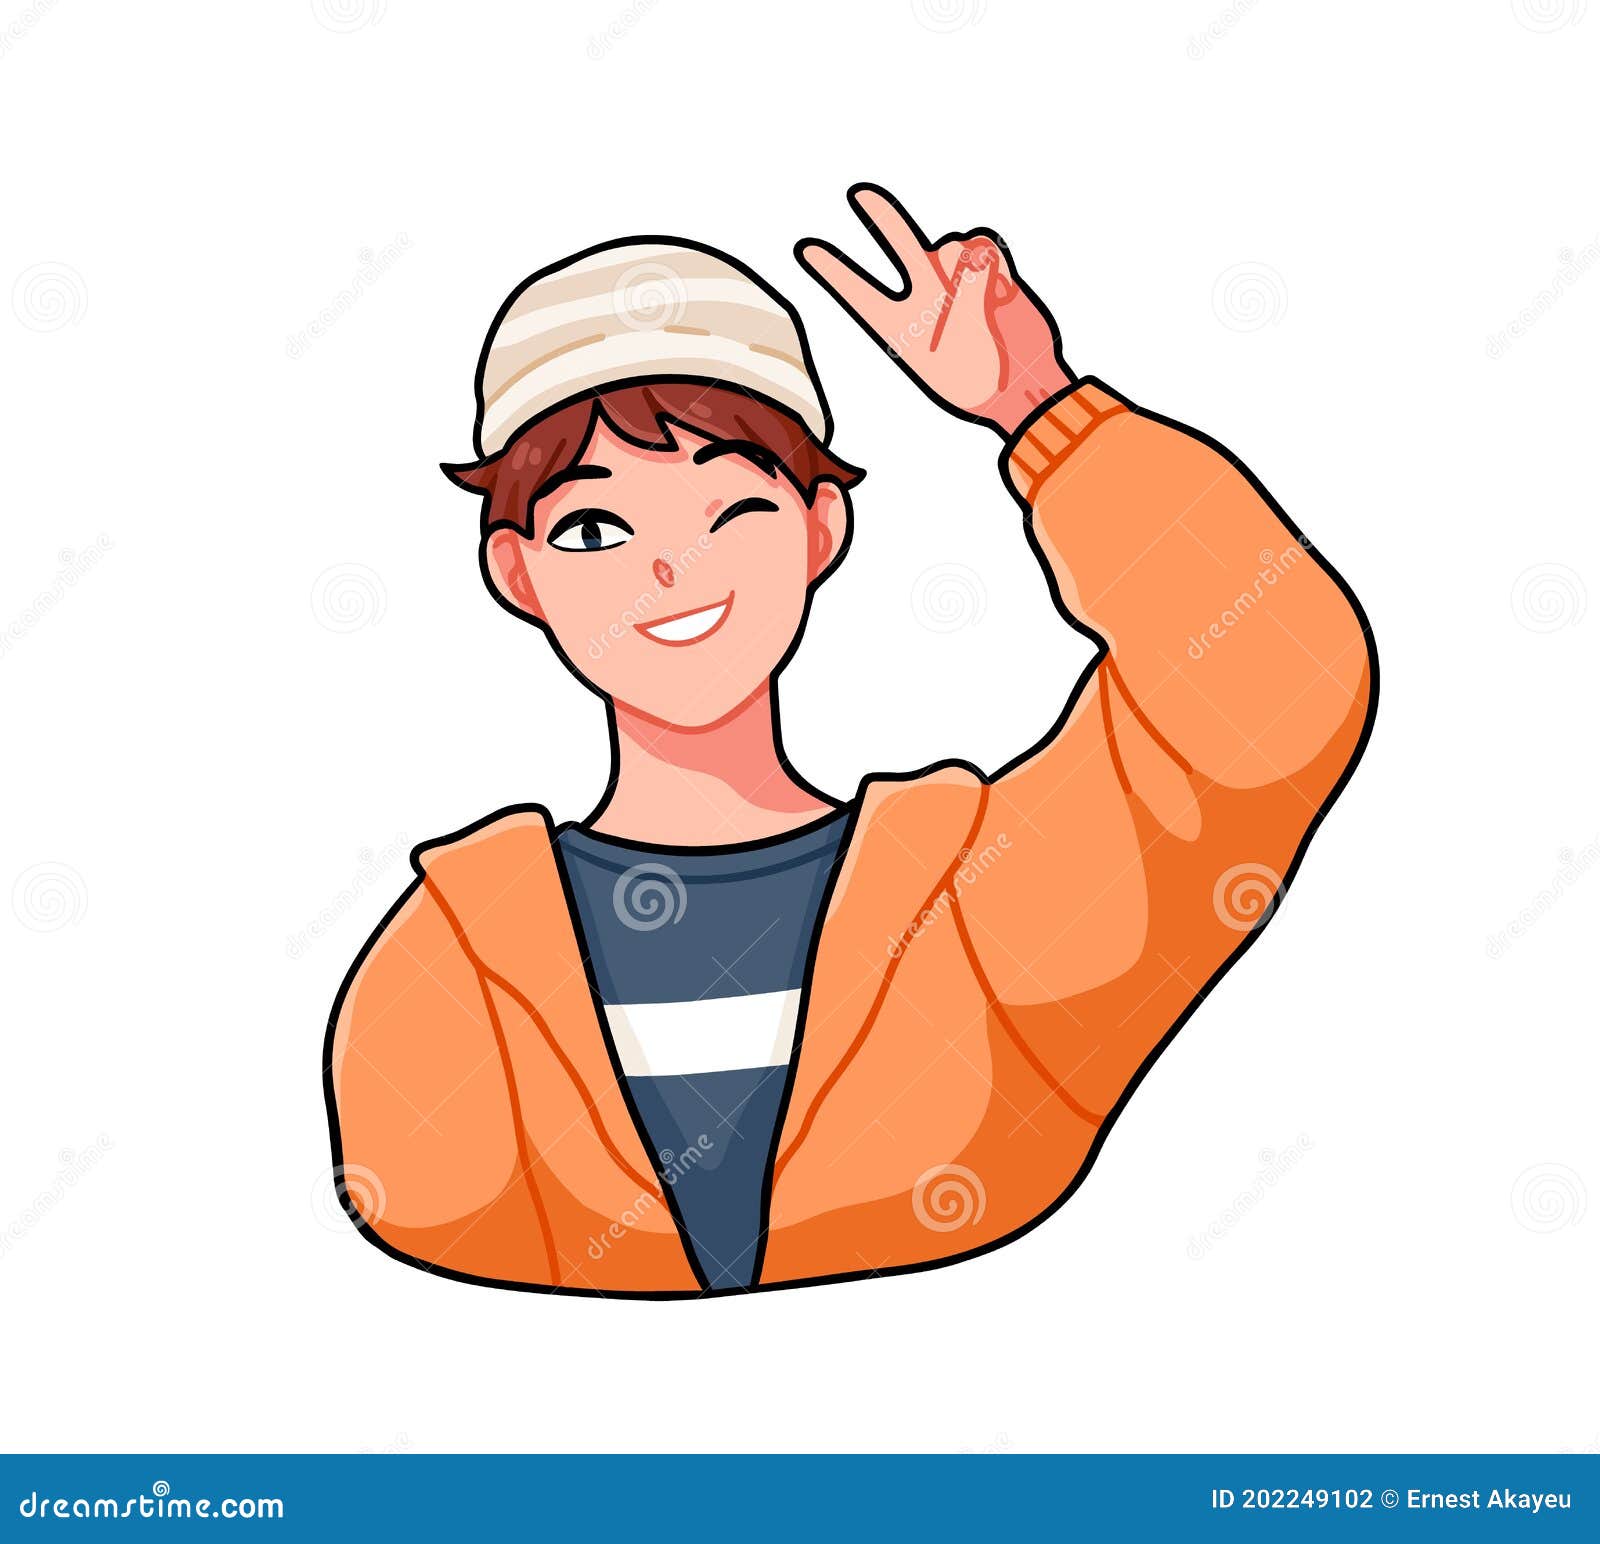 Anime Boy Stock Illustrations 8 978 Anime Boy Stock Illustrations Vectors Clipart Dreamstime To be honest, it quite hard to describe how to draw anime boy through words itself. dreamstime com